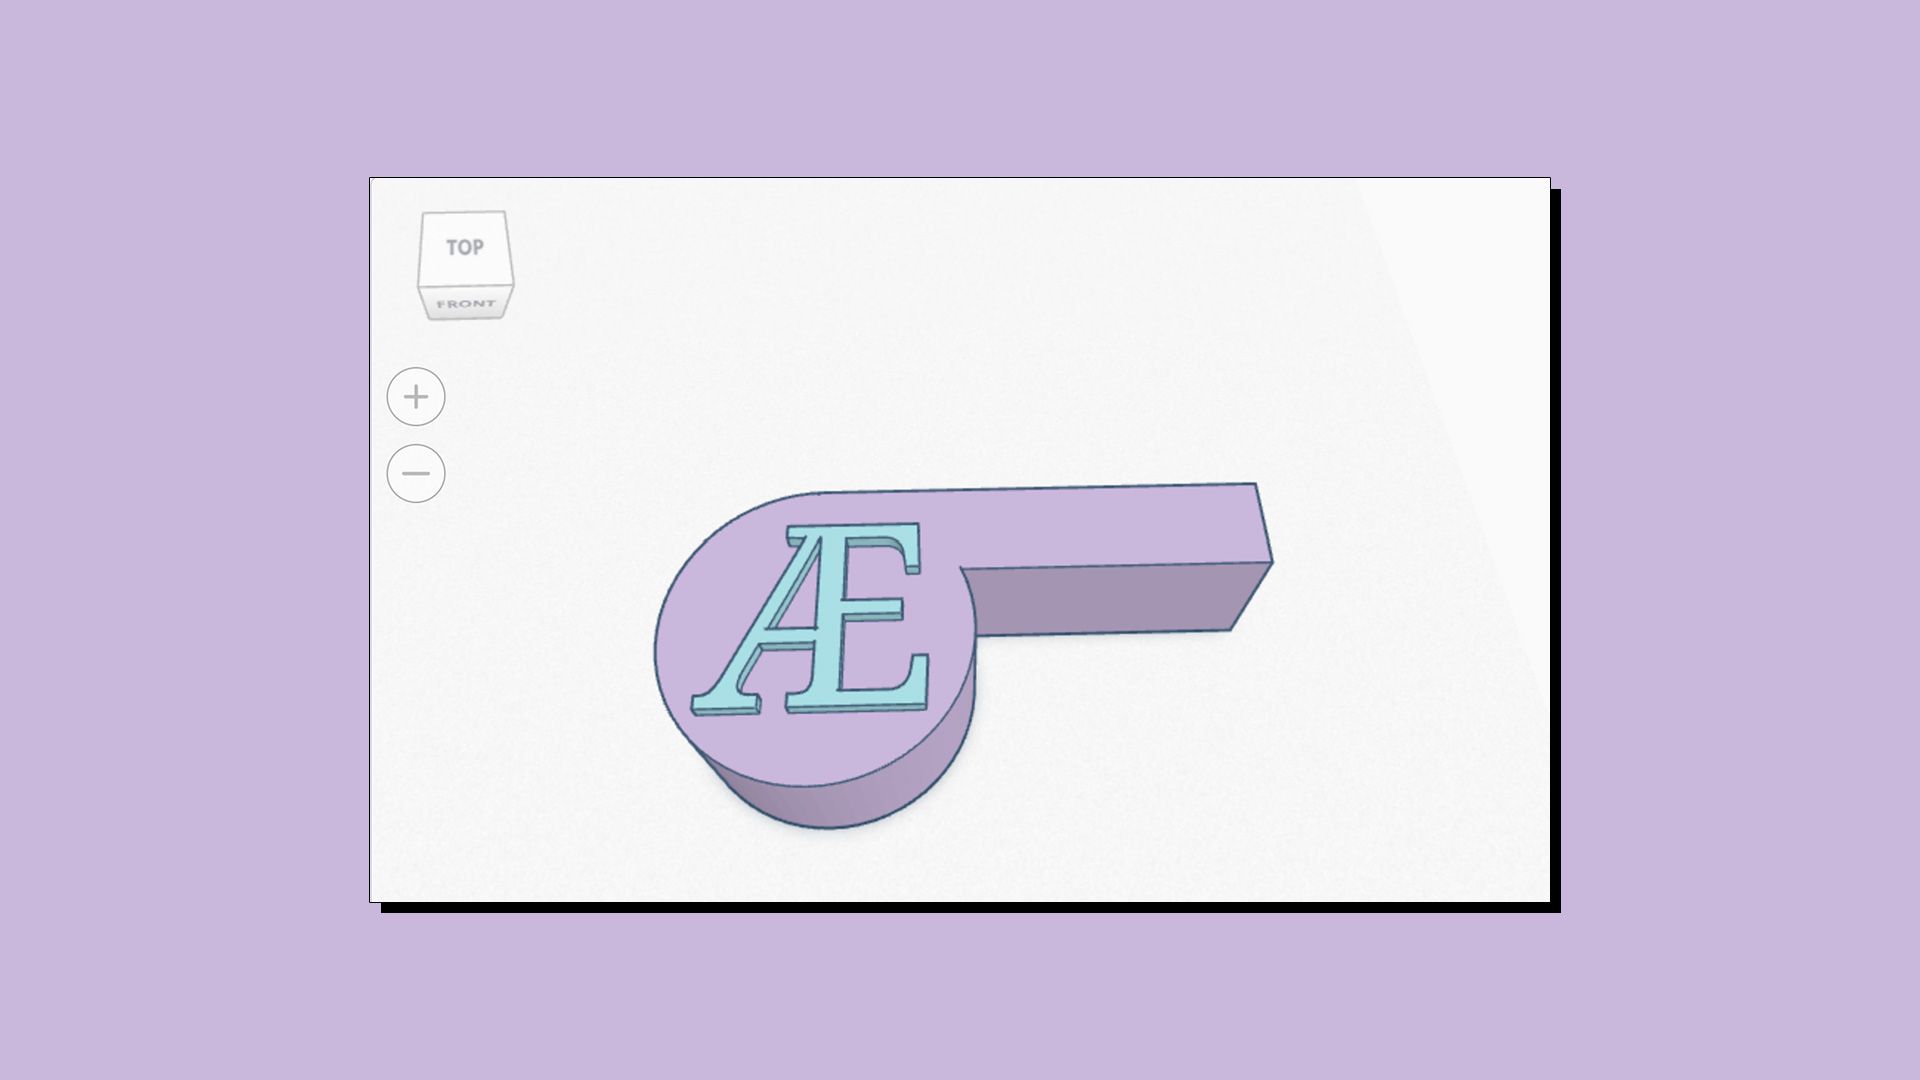 Tinkercad design of a whistle with the initials "AE".